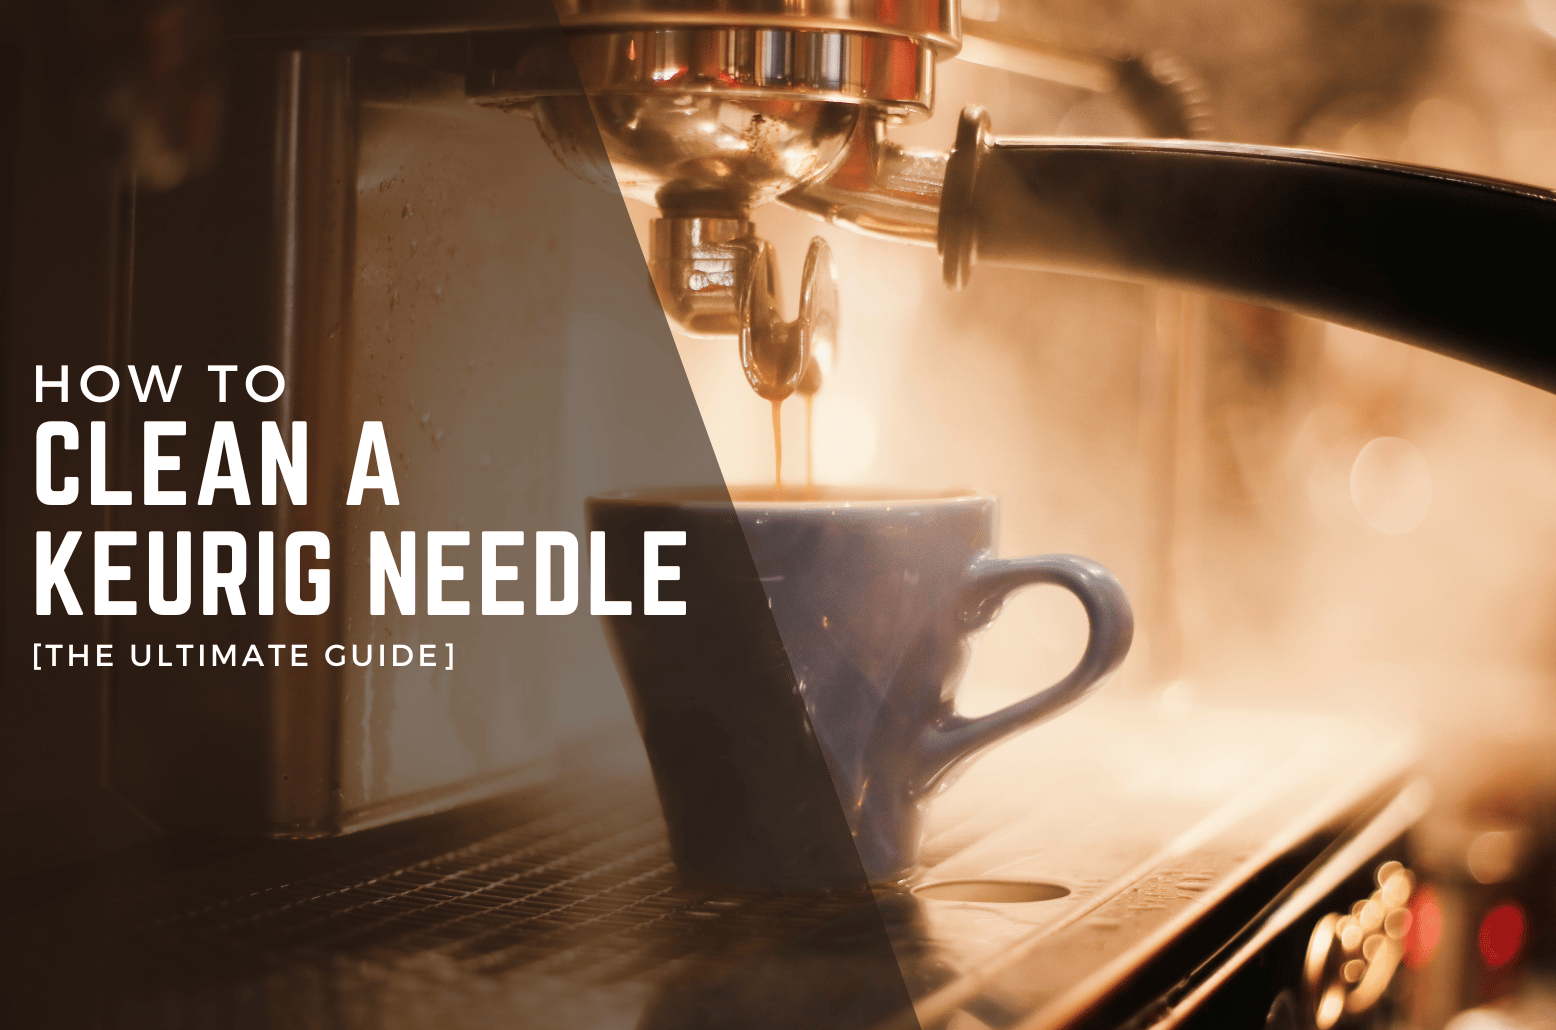 How to Clean a Keurig Needle and Keep it Clean [The Ultimate Guide]